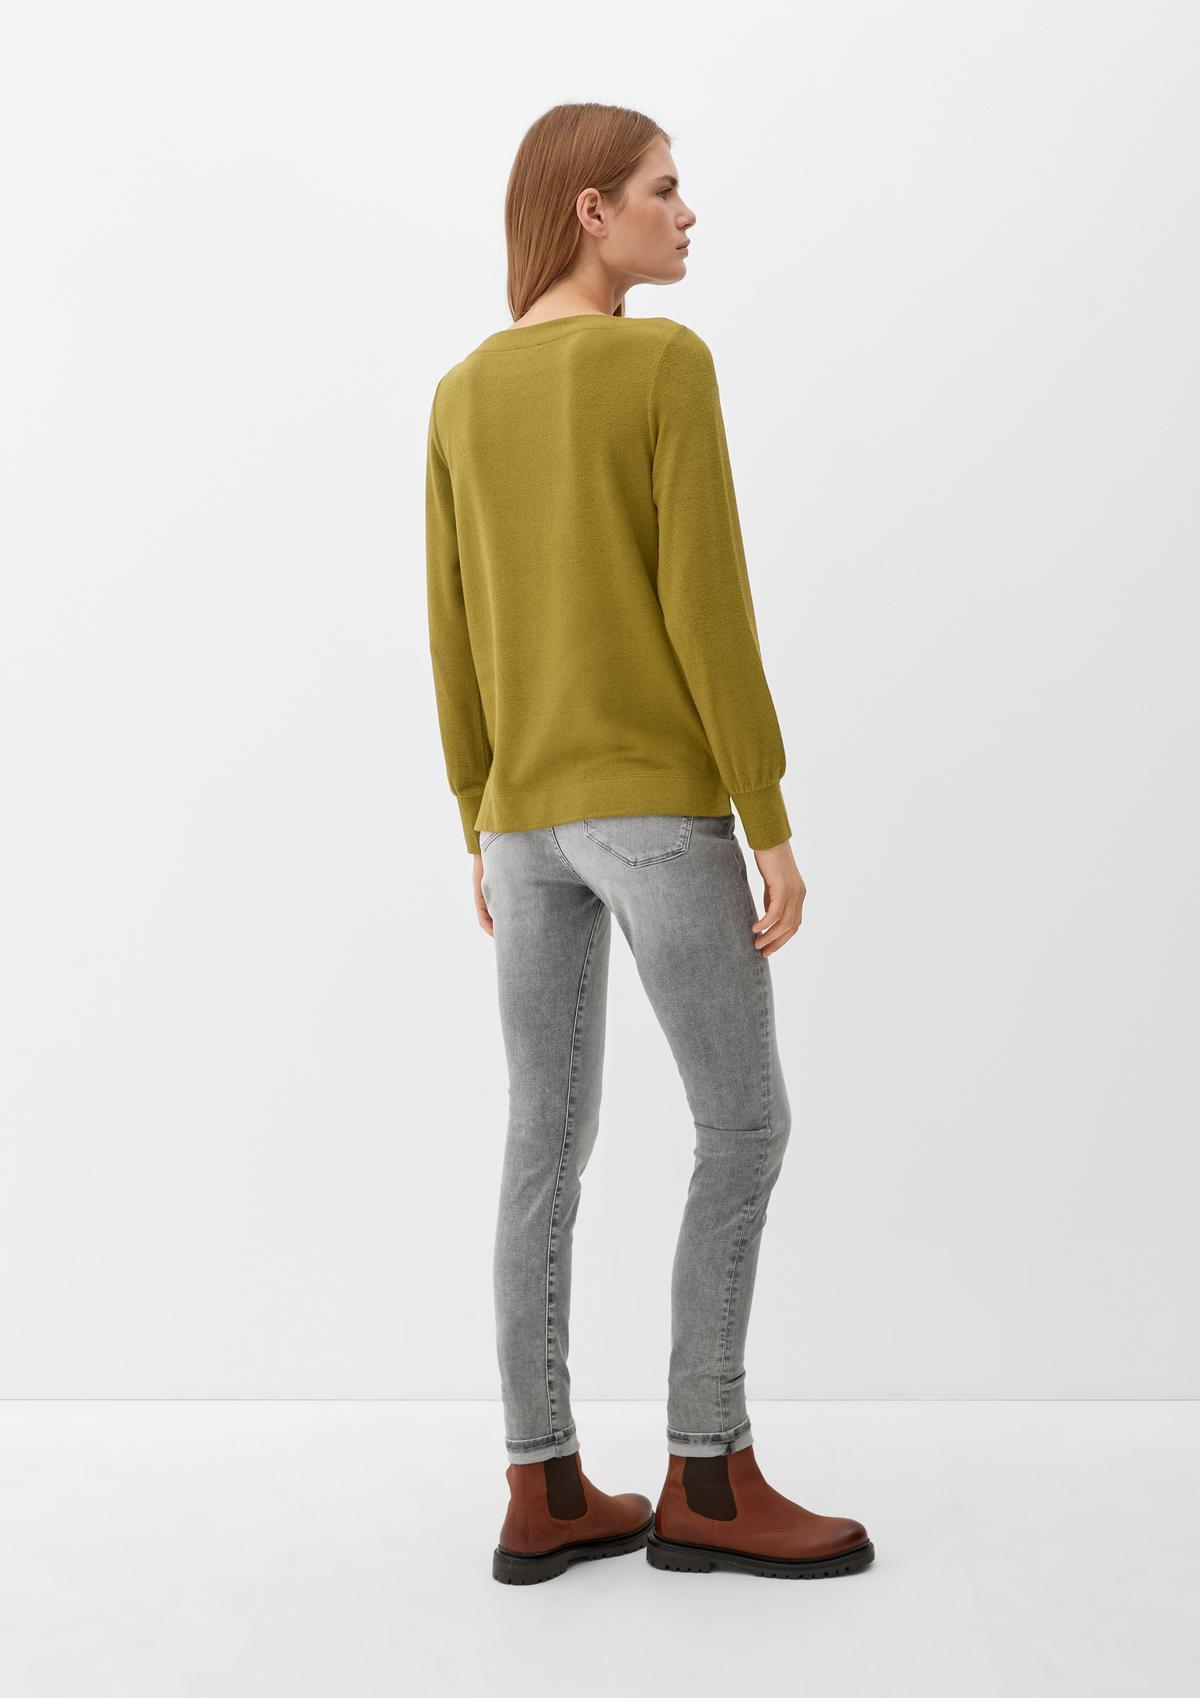 s.Oliver Long sleeve top with a melange finish